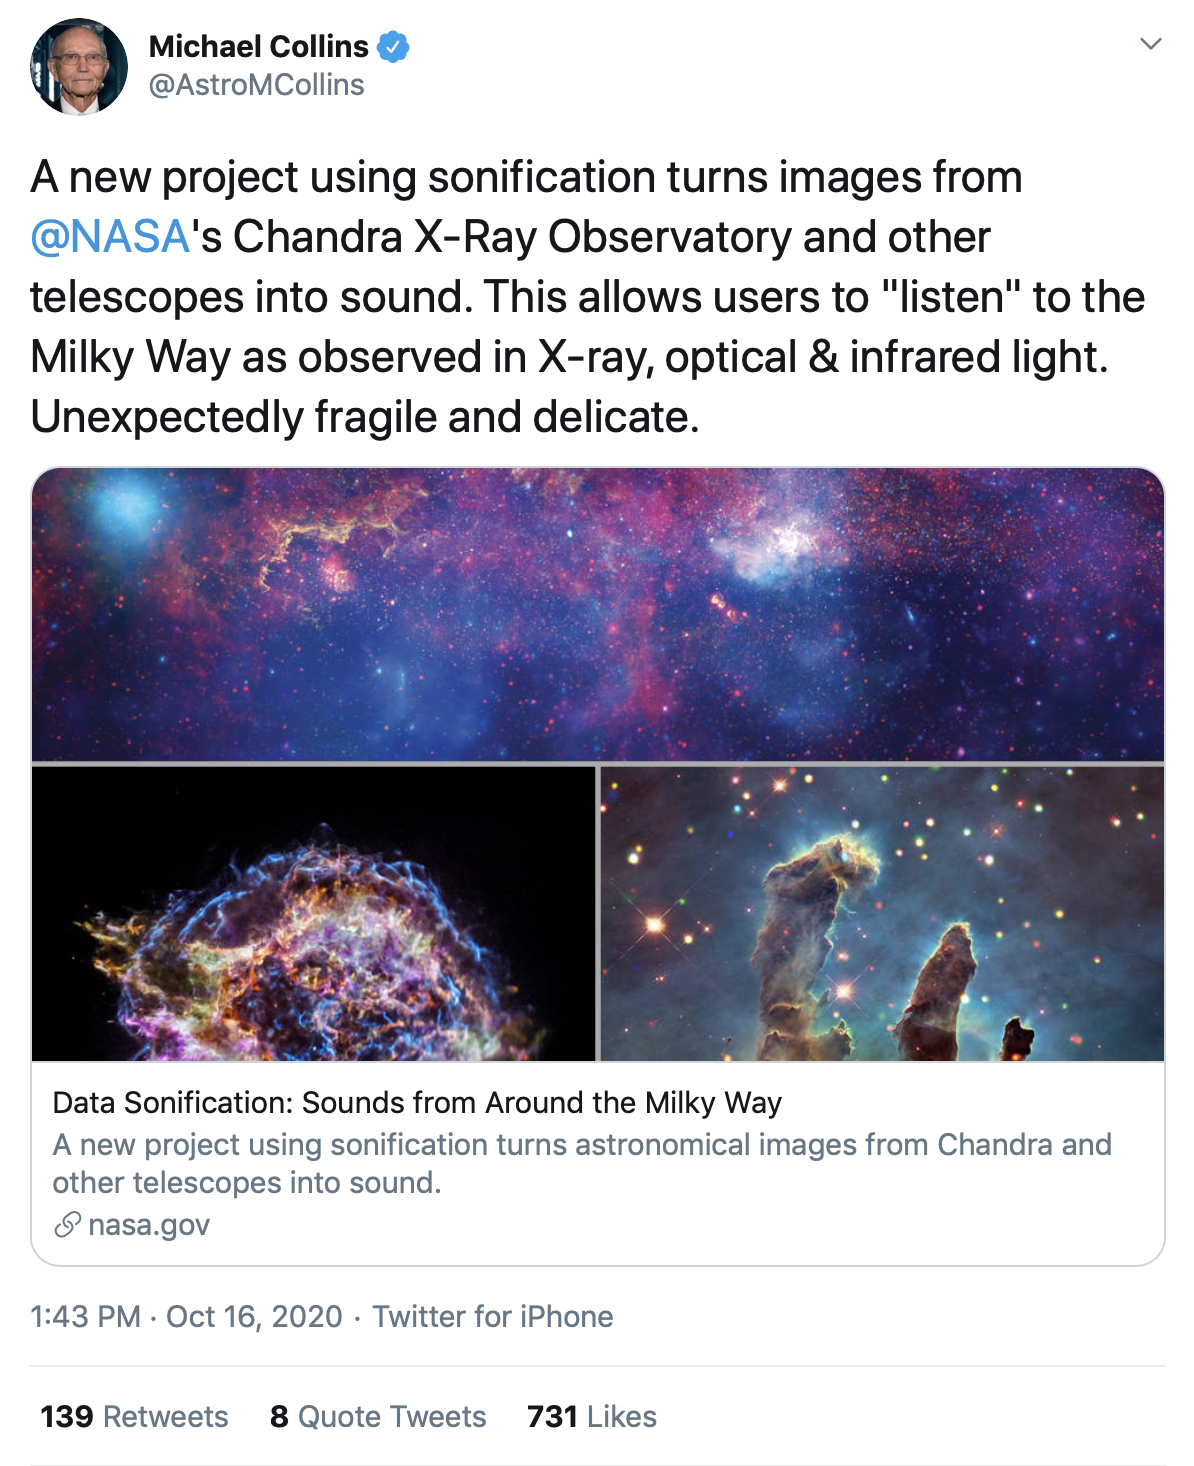 Screenshot of Michael Collins sharing the Chandra sonification project on twitter.